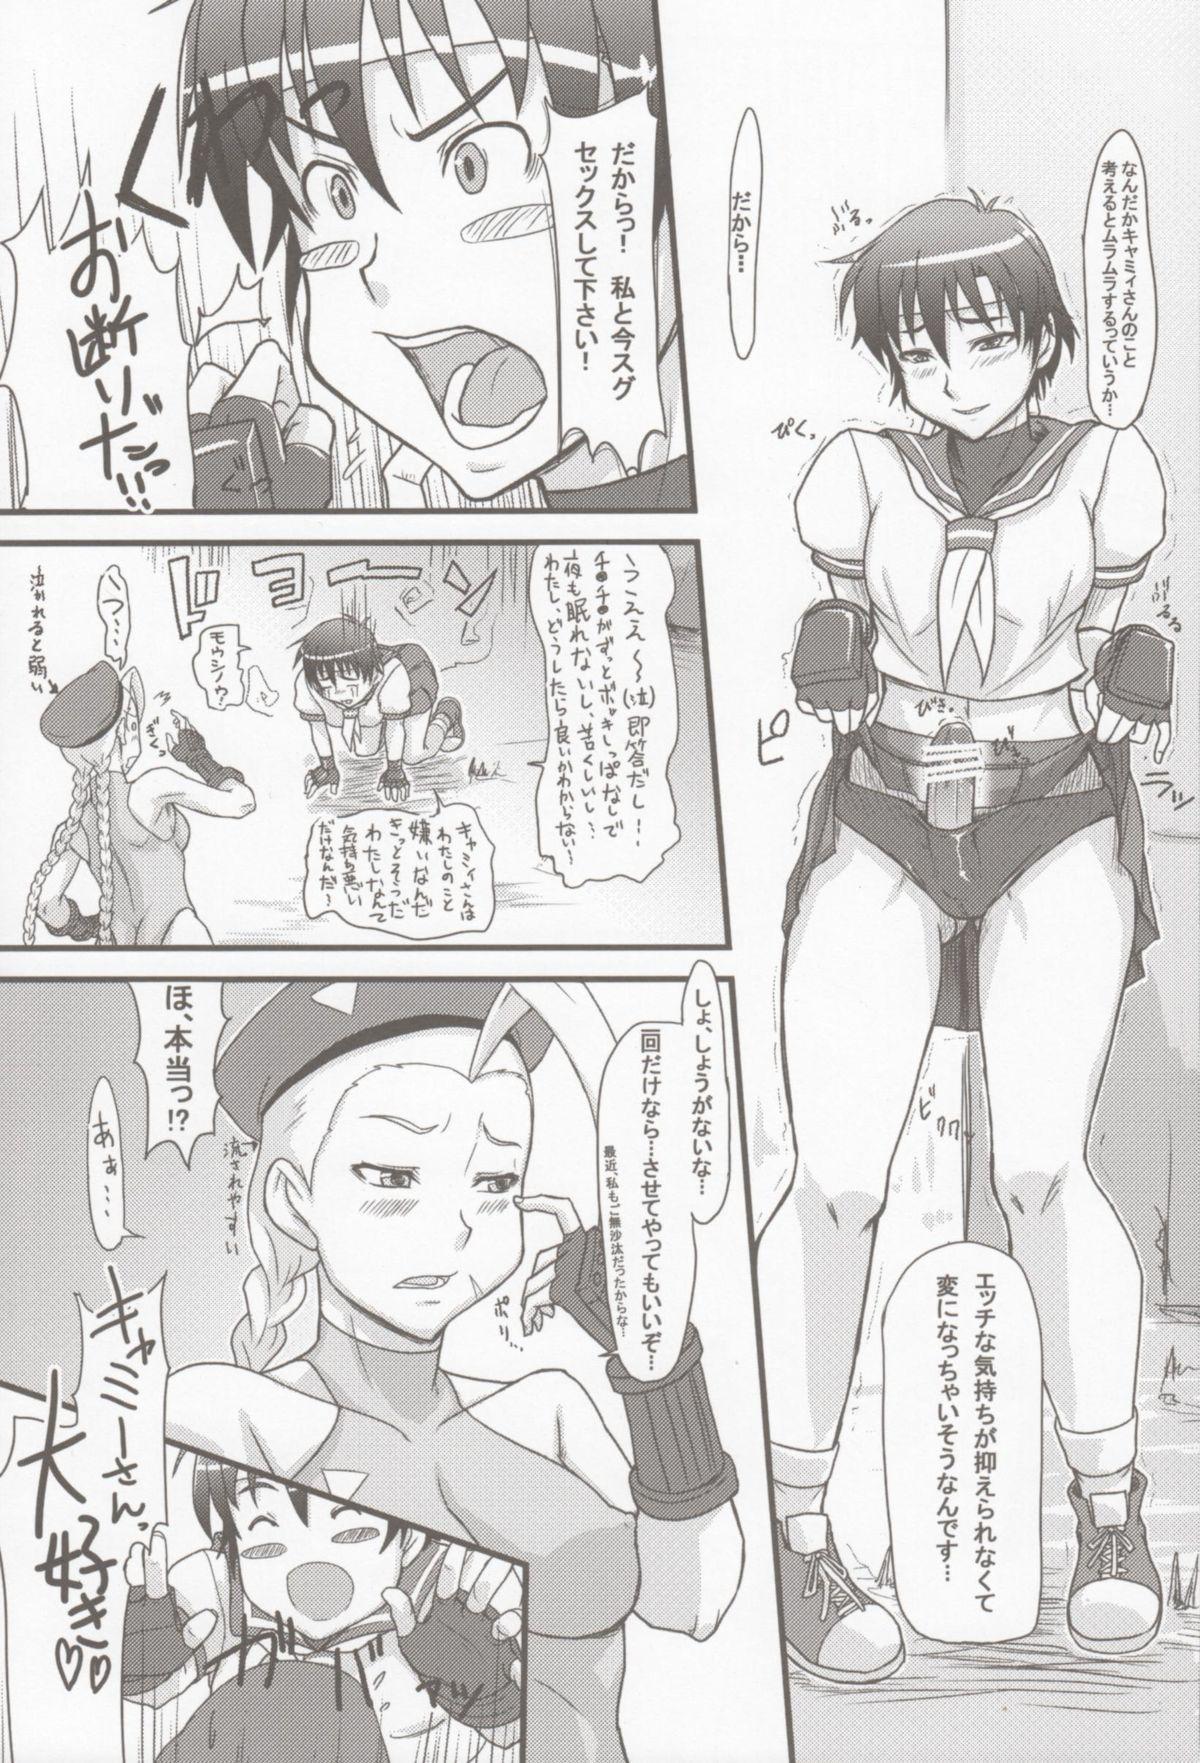 Ruiva Cammy Saku! Fighter Material Vol. 2 - Street fighter Free Porn Hardcore - Page 8